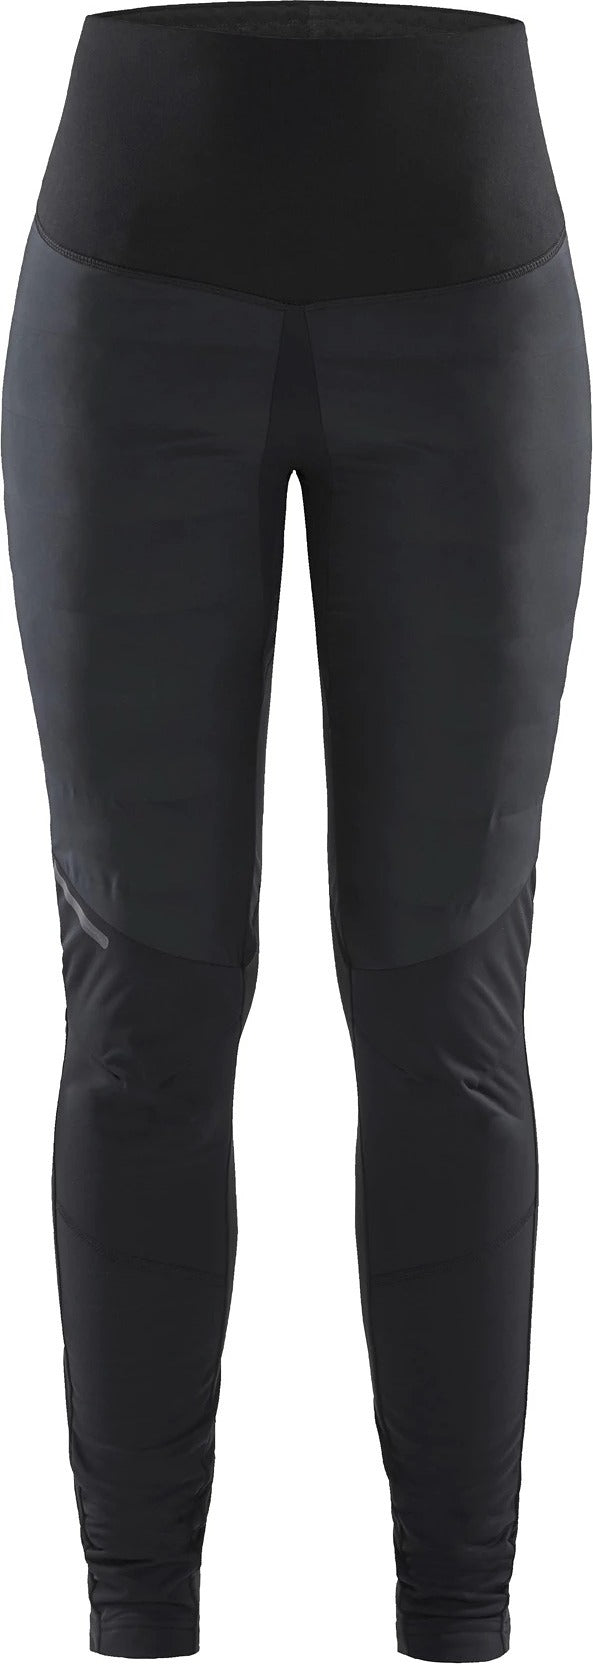 Craft Pursuit Thermal Cross Country Ski Tights - Women's